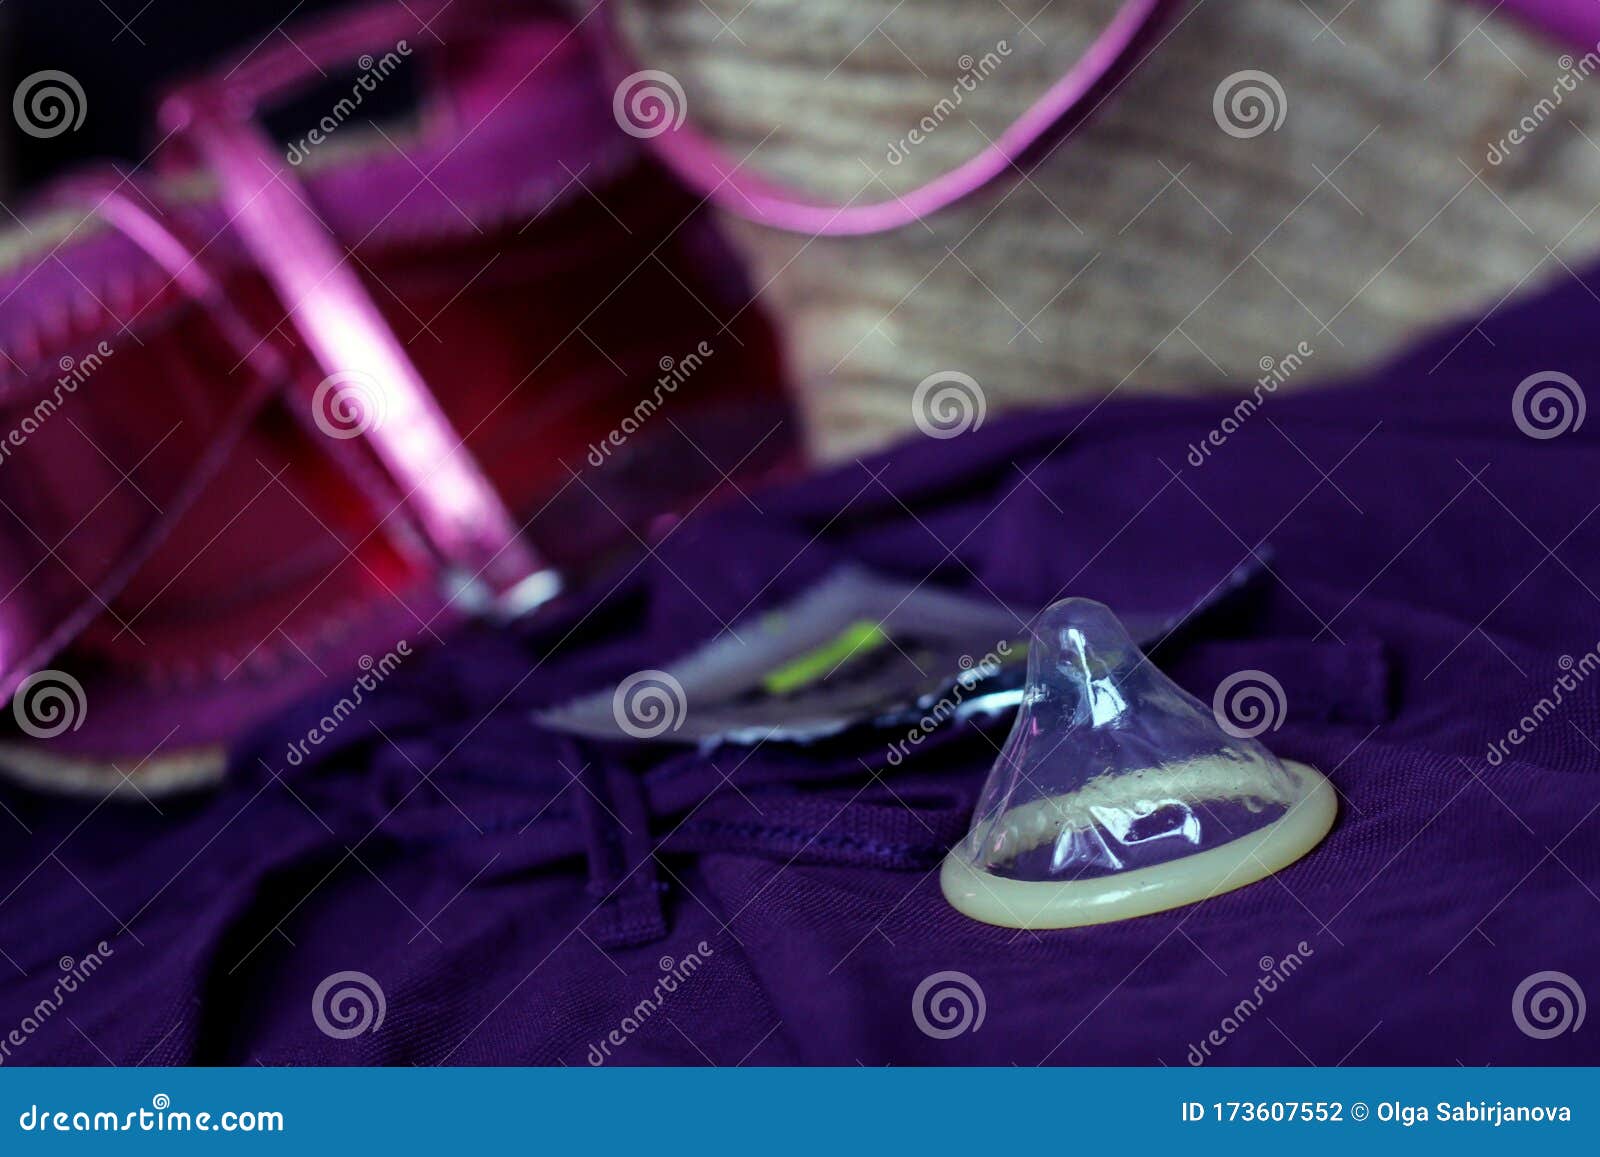 Latex Condom And Womens Things On The Sofa Stock Photo